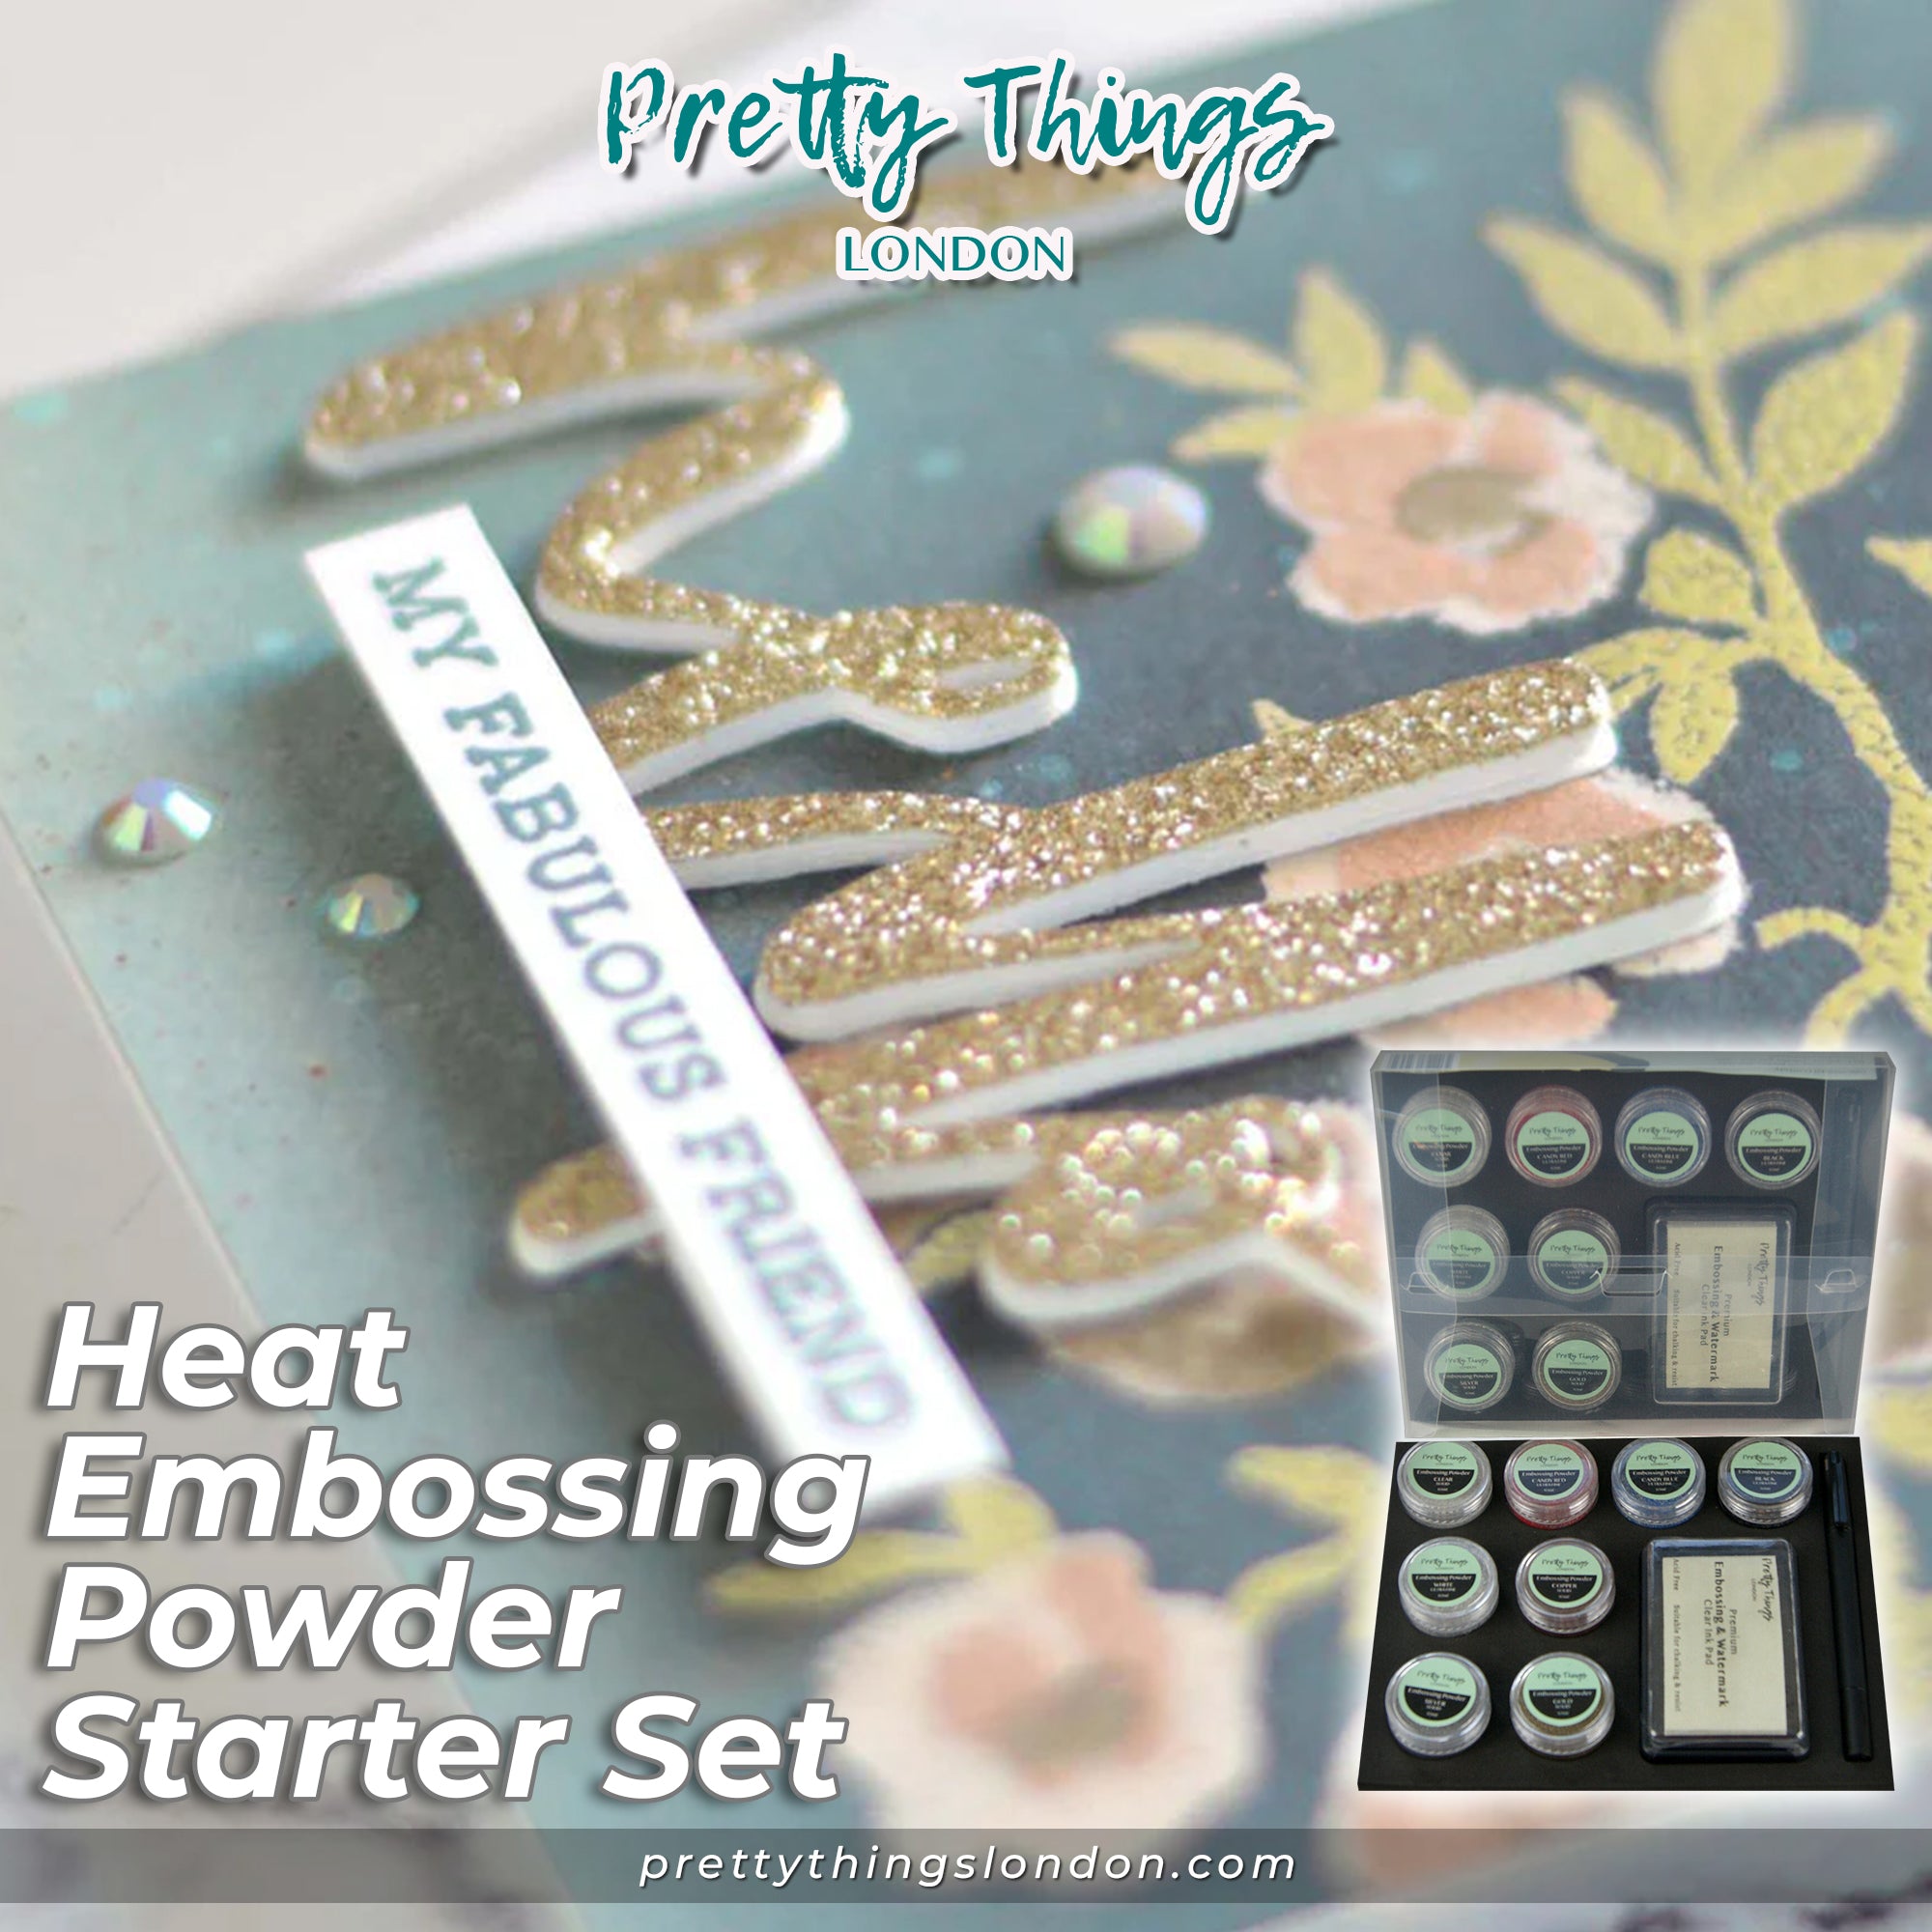 How To Use Embossing Powder by Pretty Things London